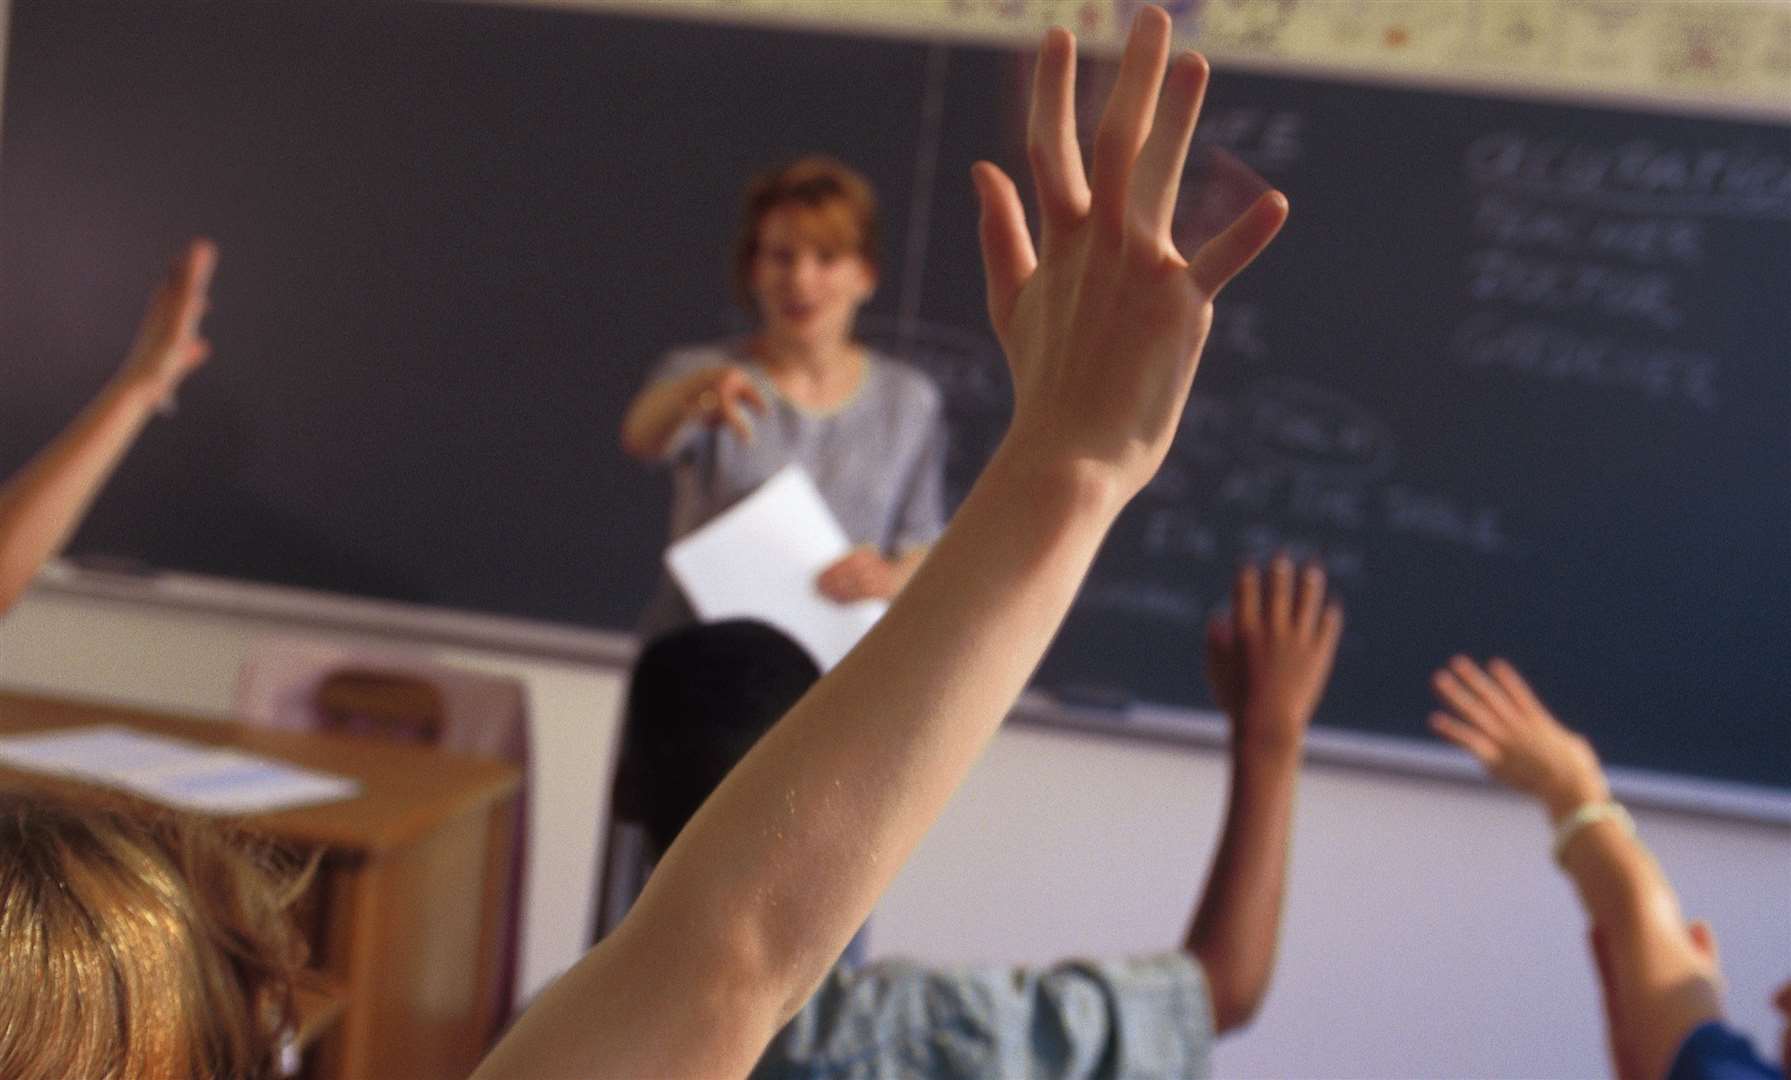 Many are wondering just how teachers cope all day Copyright: Comstock/Thinkstock